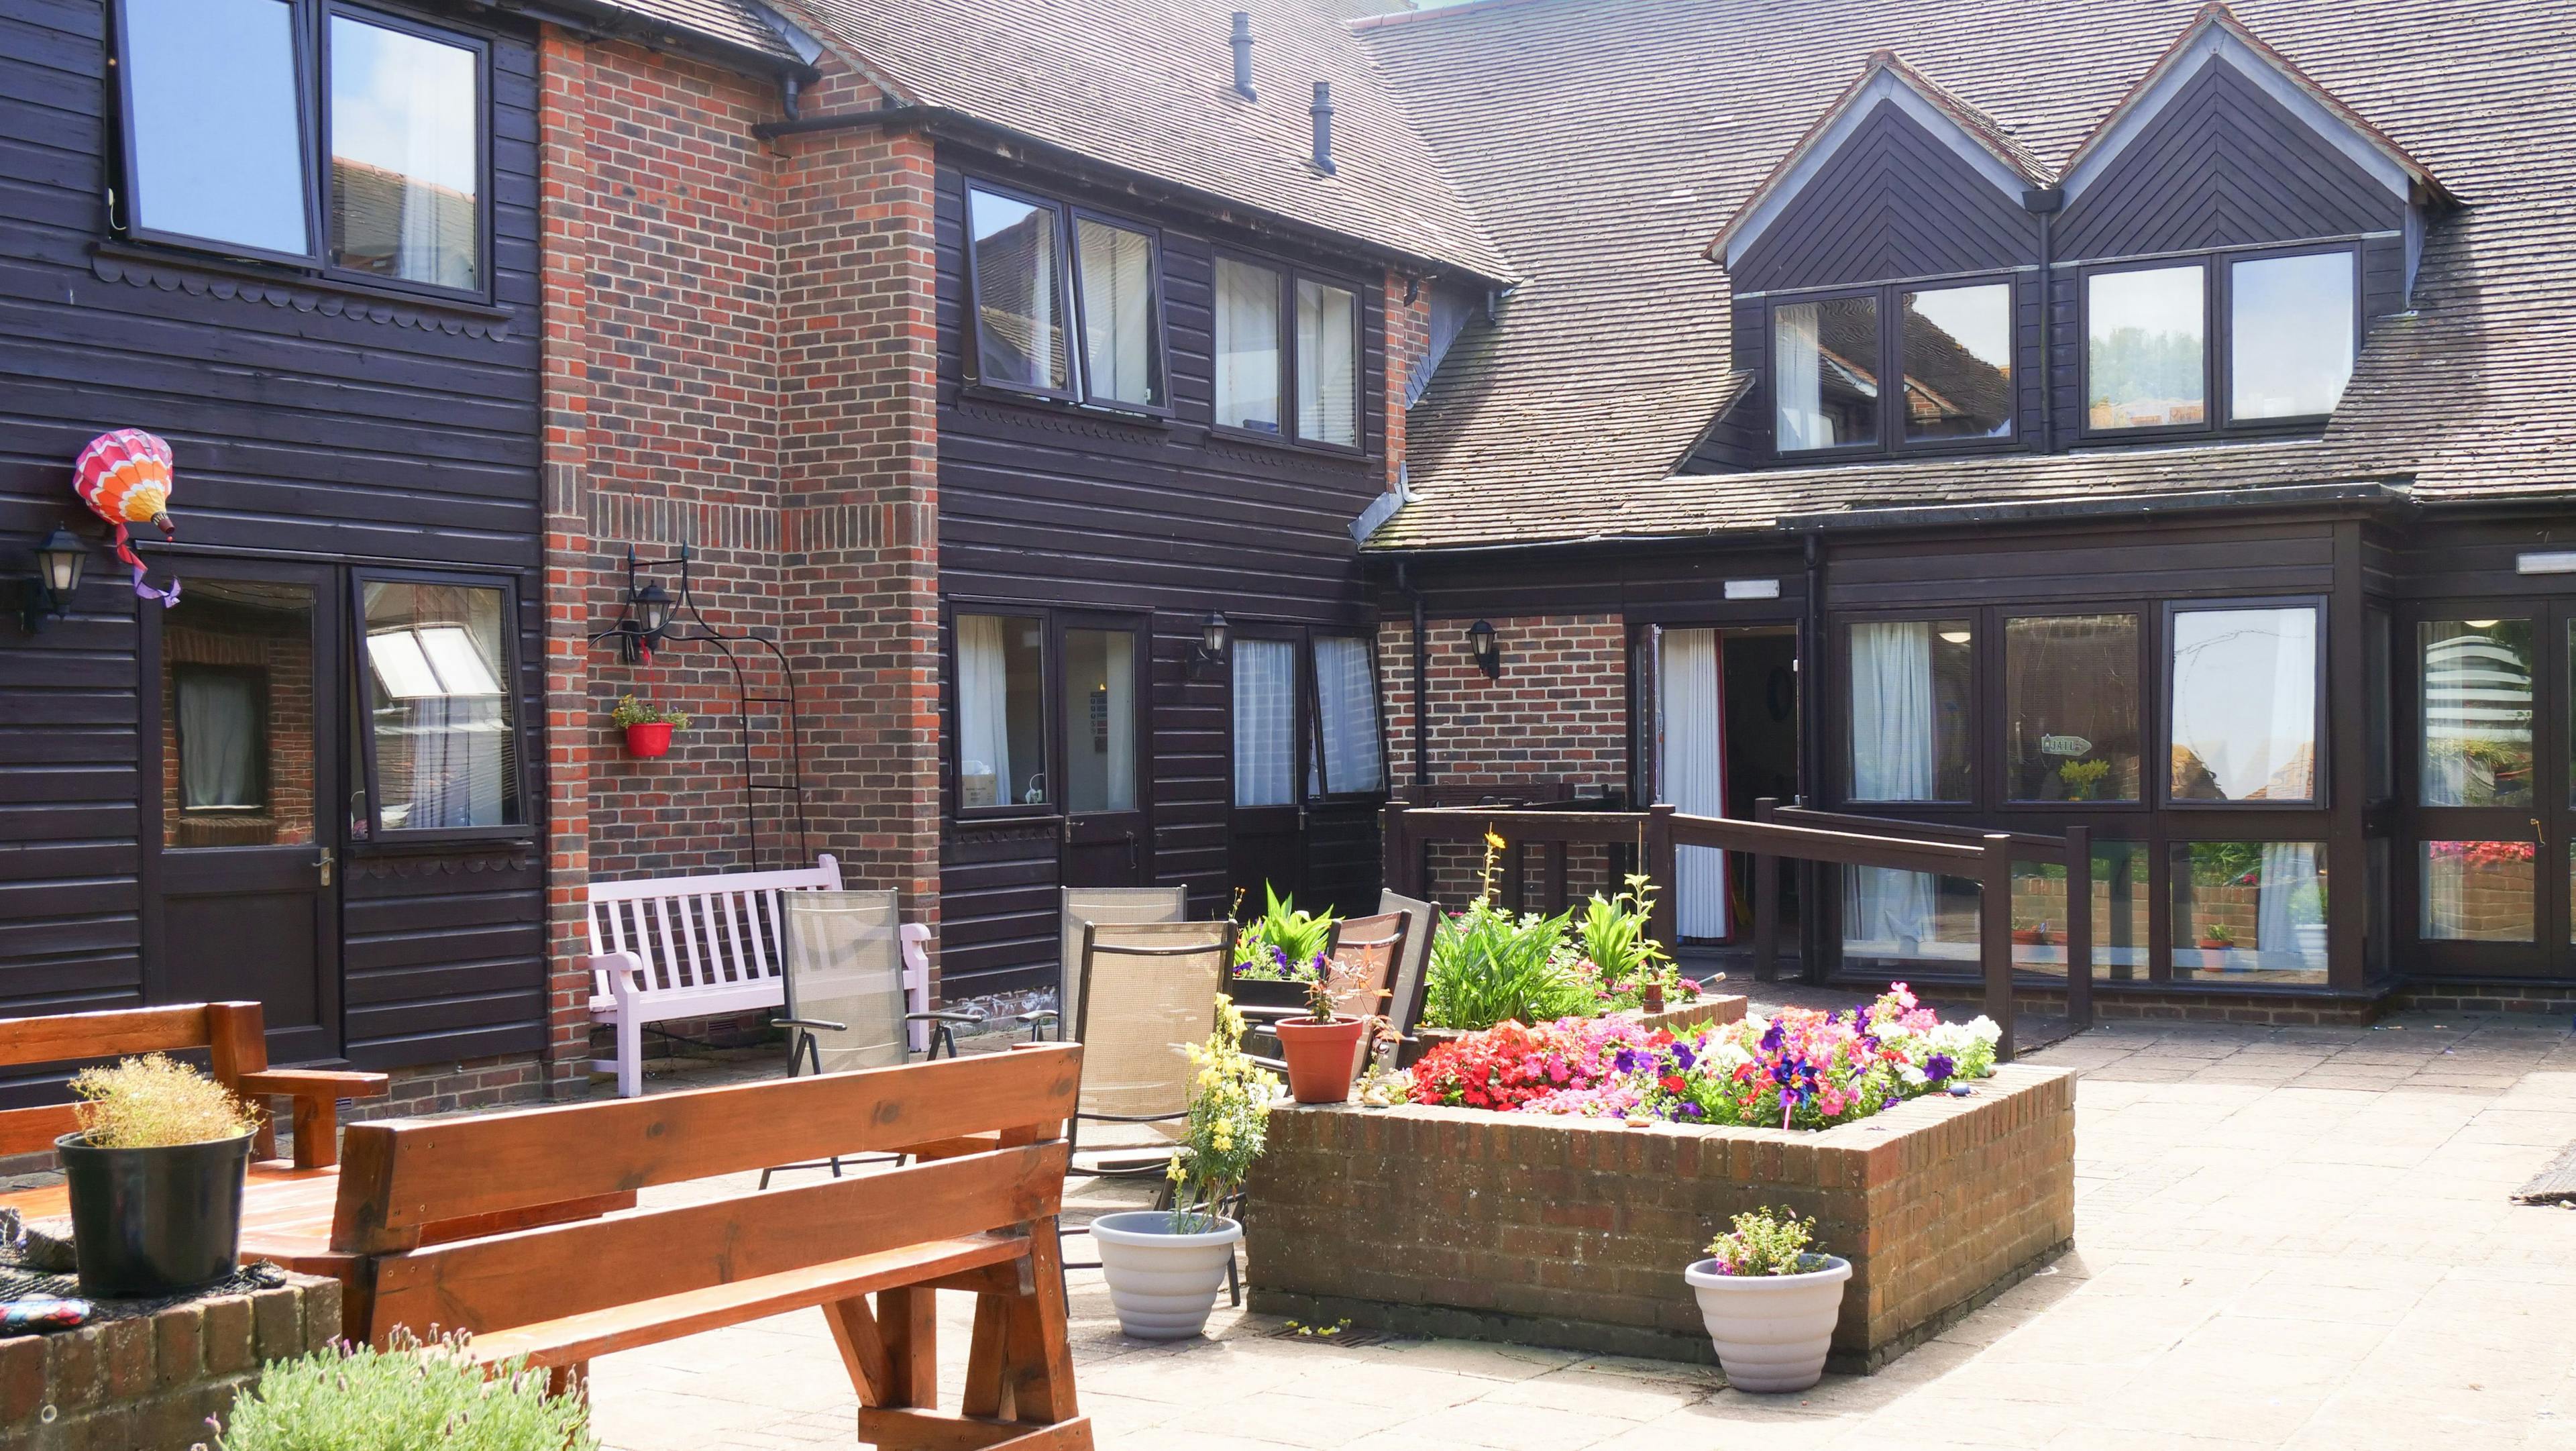 Fulford Care and Nursing Home in Littlehampton 2